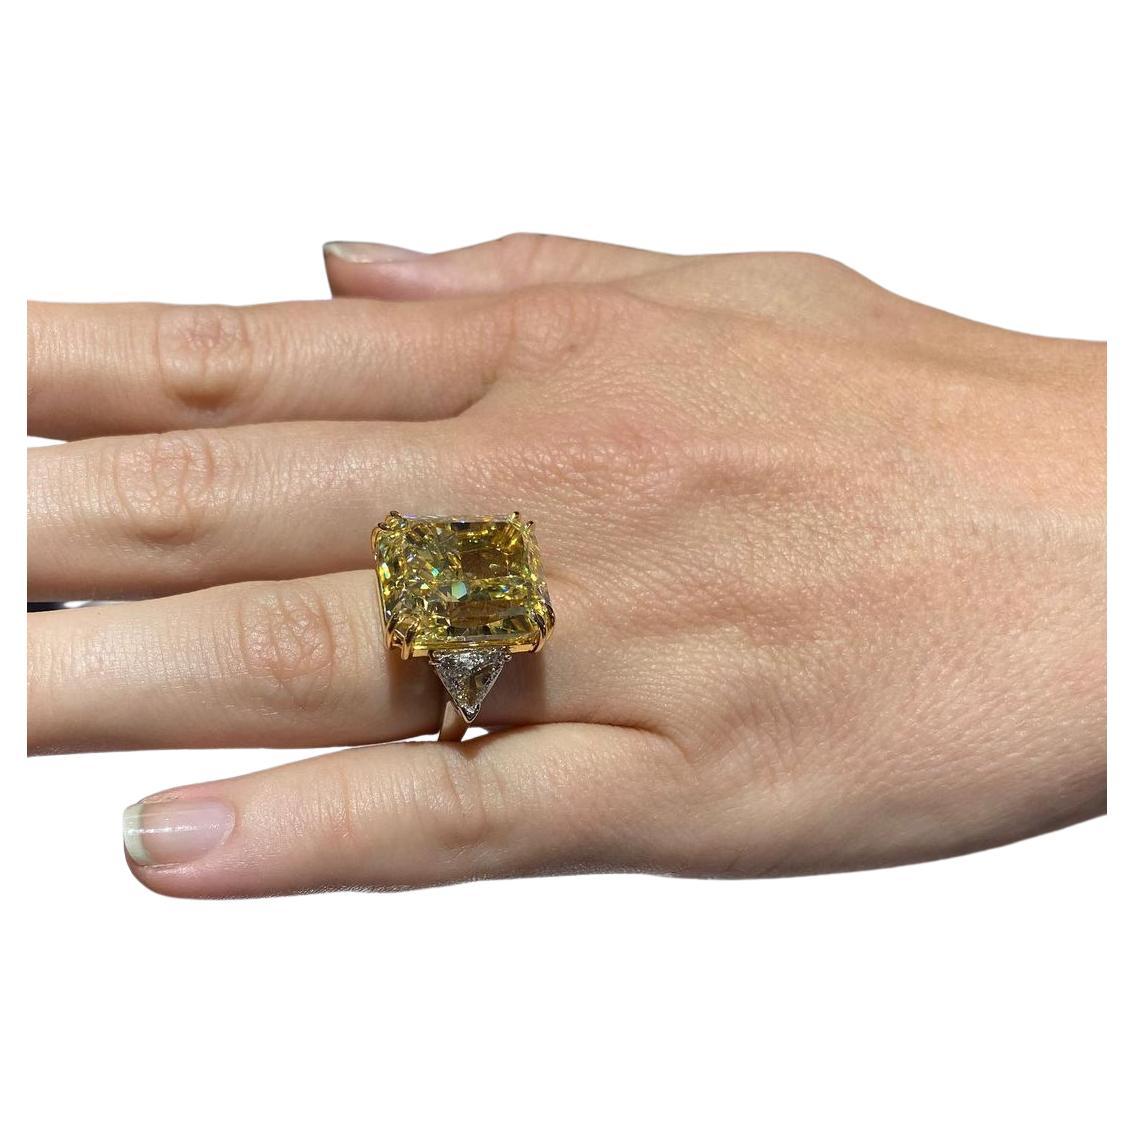 An exquisite 7.20 carat radiant cut fancy yellow diamond ring set with two tapered baguette diamonds 

